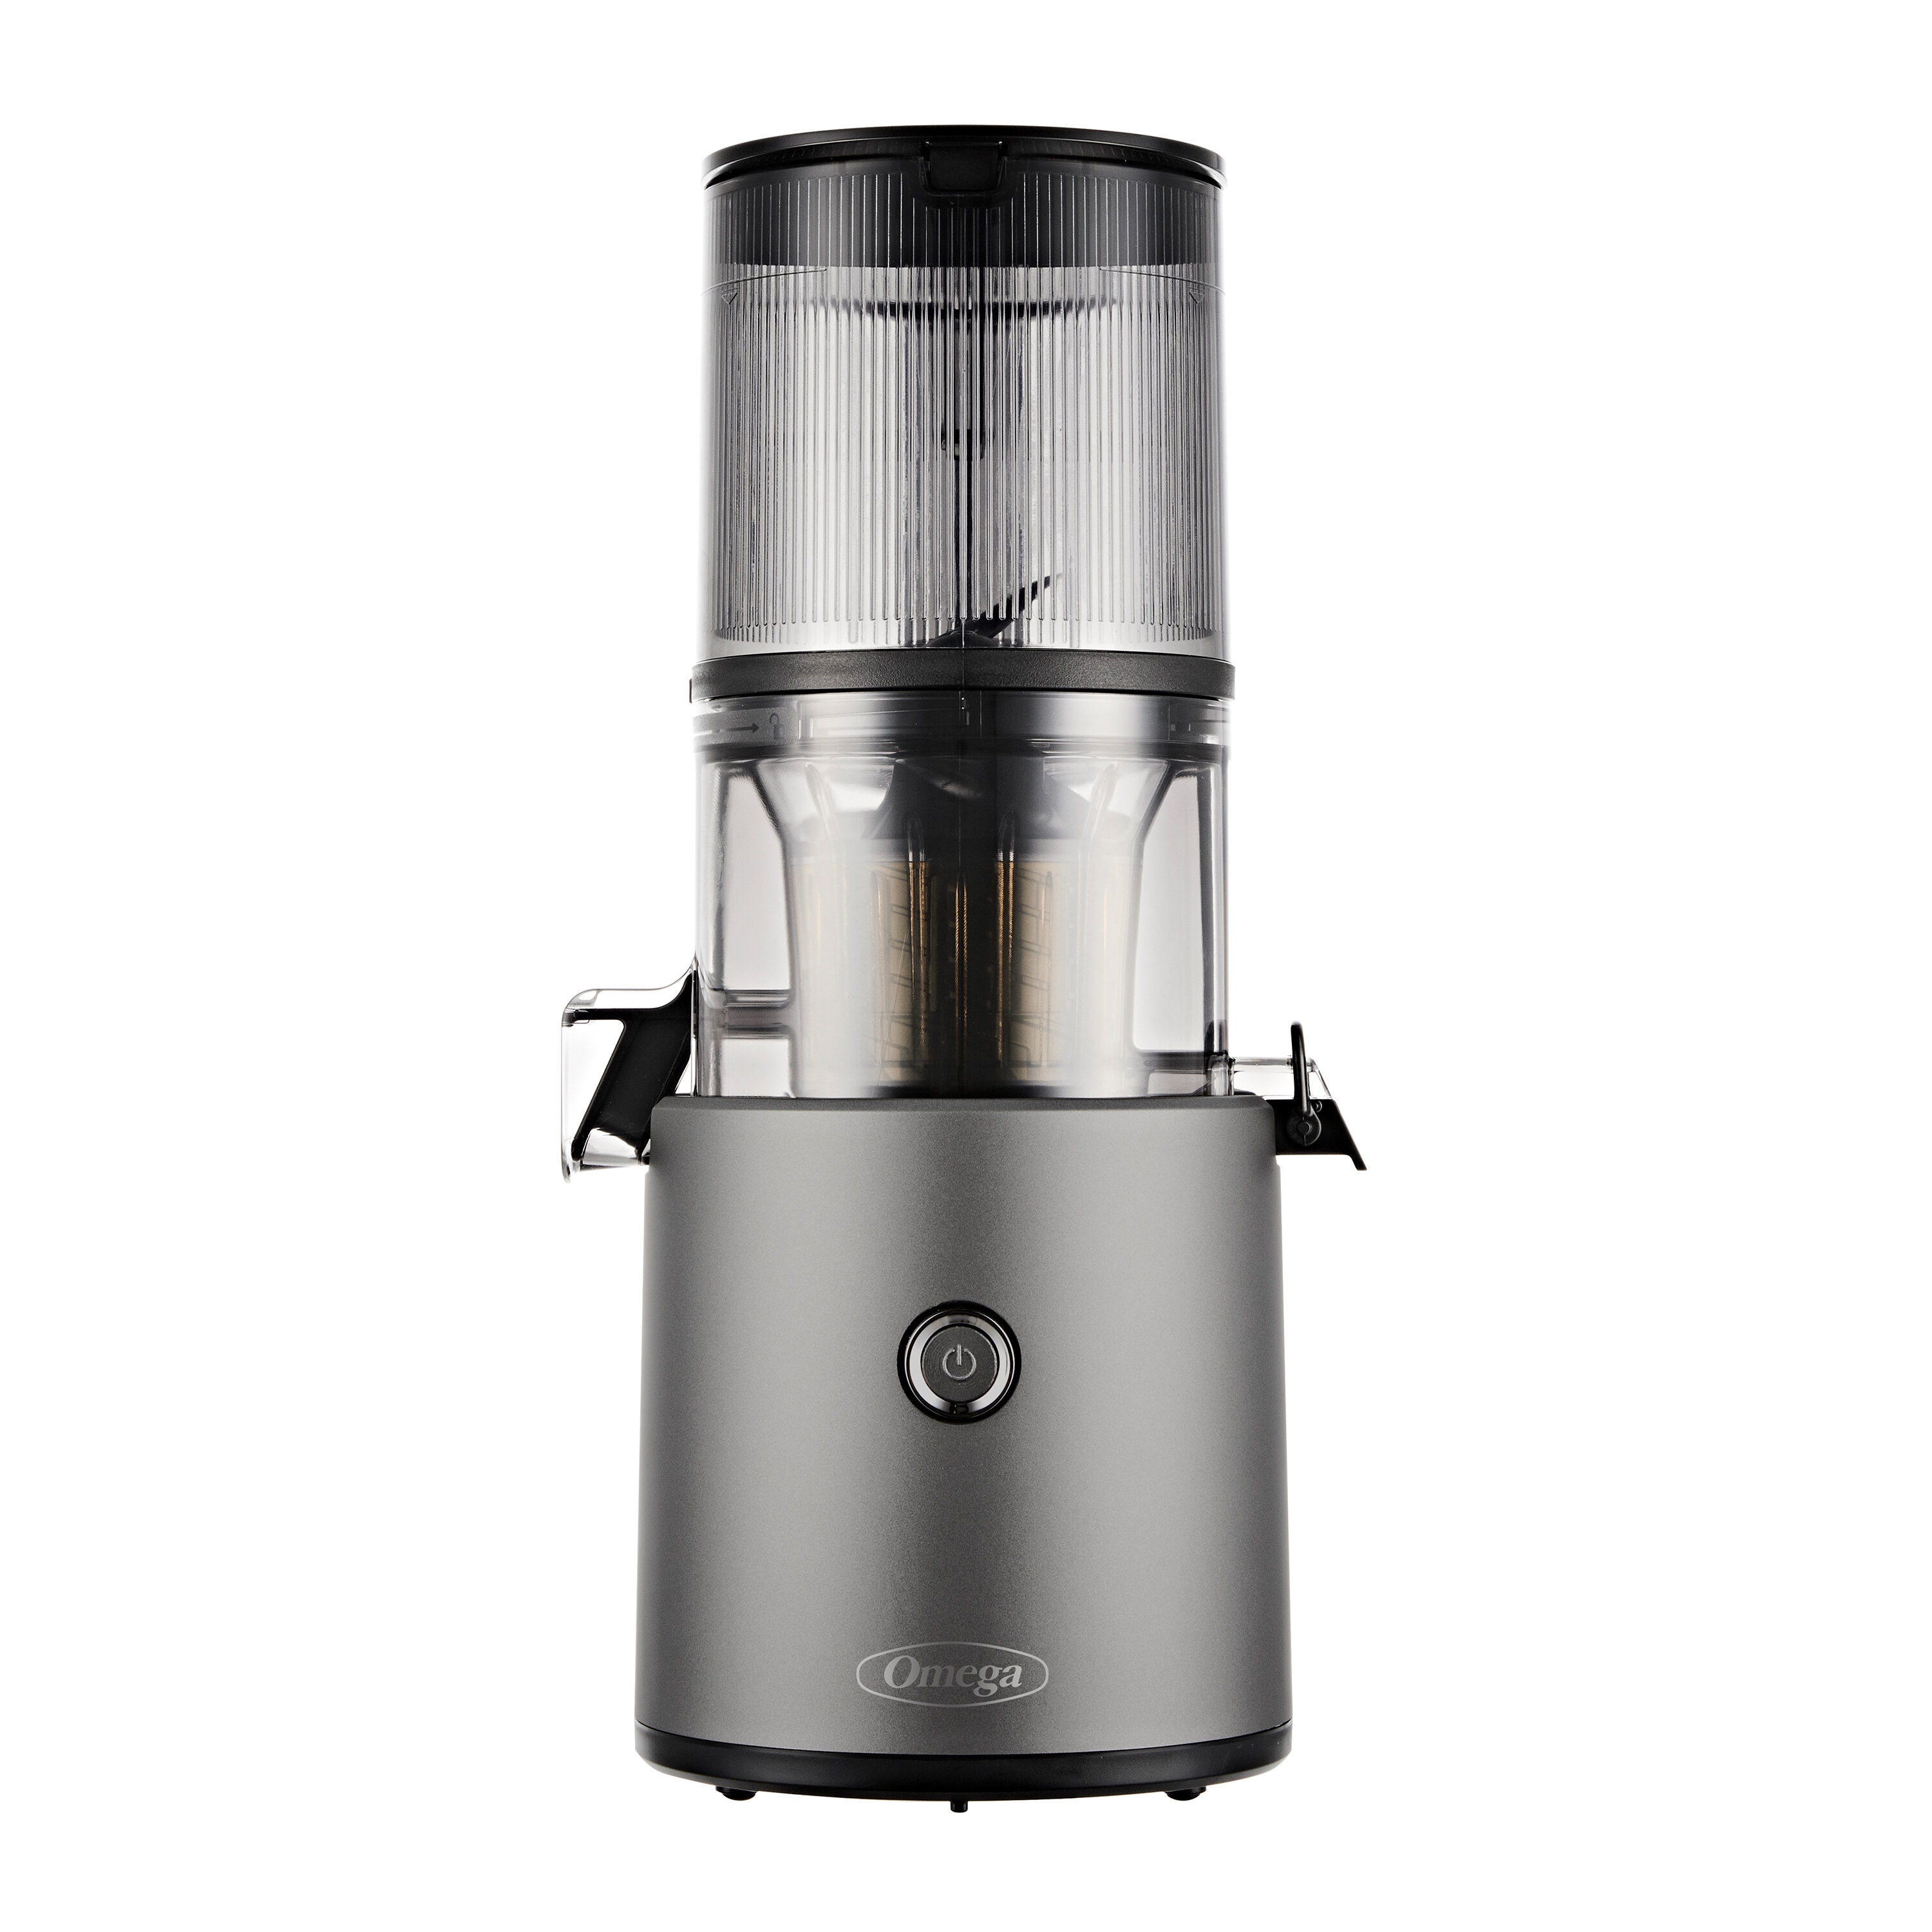 Eternal Living Portable Electric Juicer, automatic, Cordless